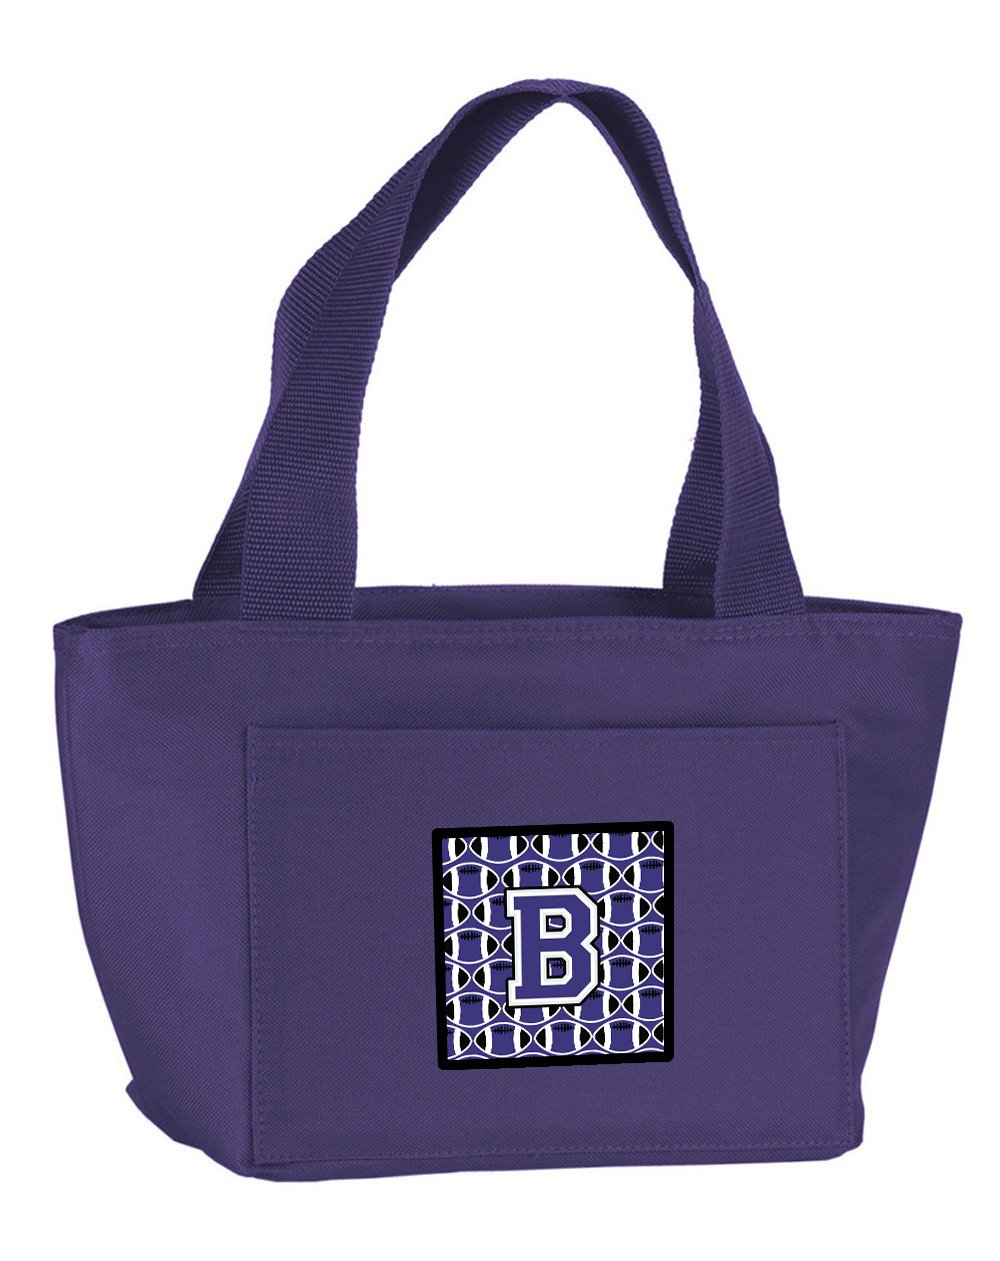 Letter B Football Purple and White Lunch Bag CJ1068-BPR-8808 by Caroline's Treasures